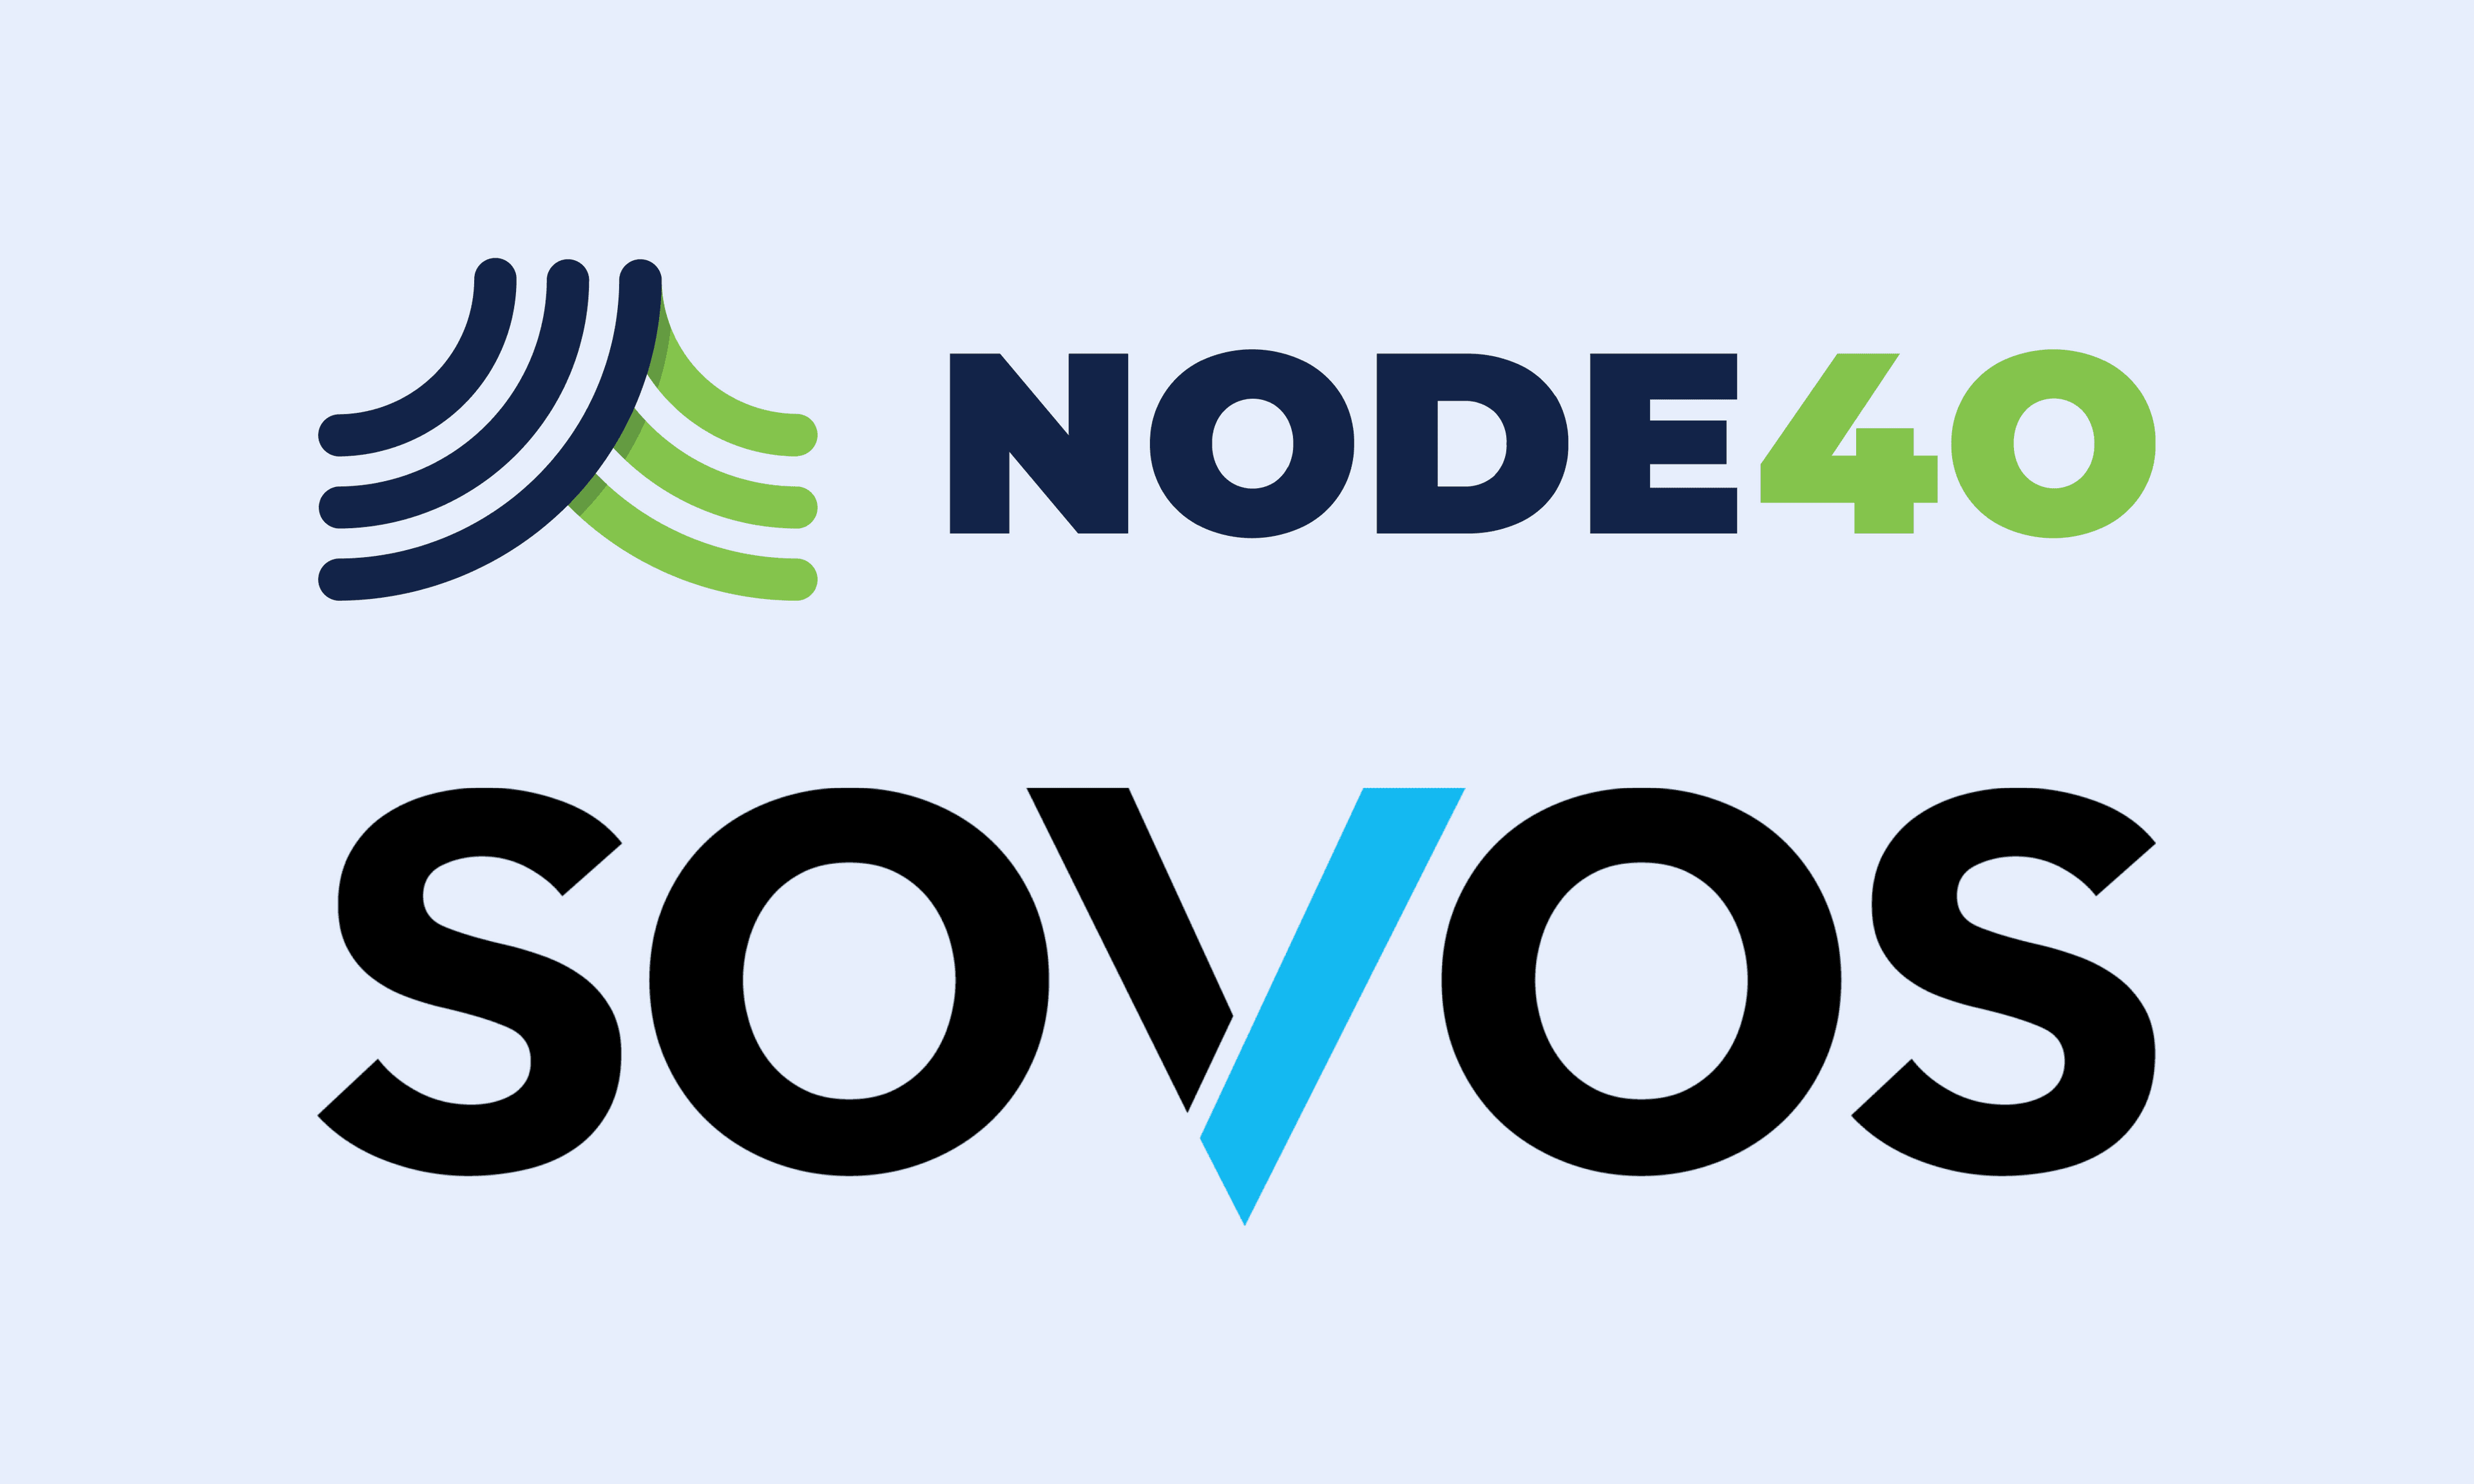 Crypto Accounting Platform NODE40 Partnering with Sovos to Serve Organizations in the Digital Asset Space